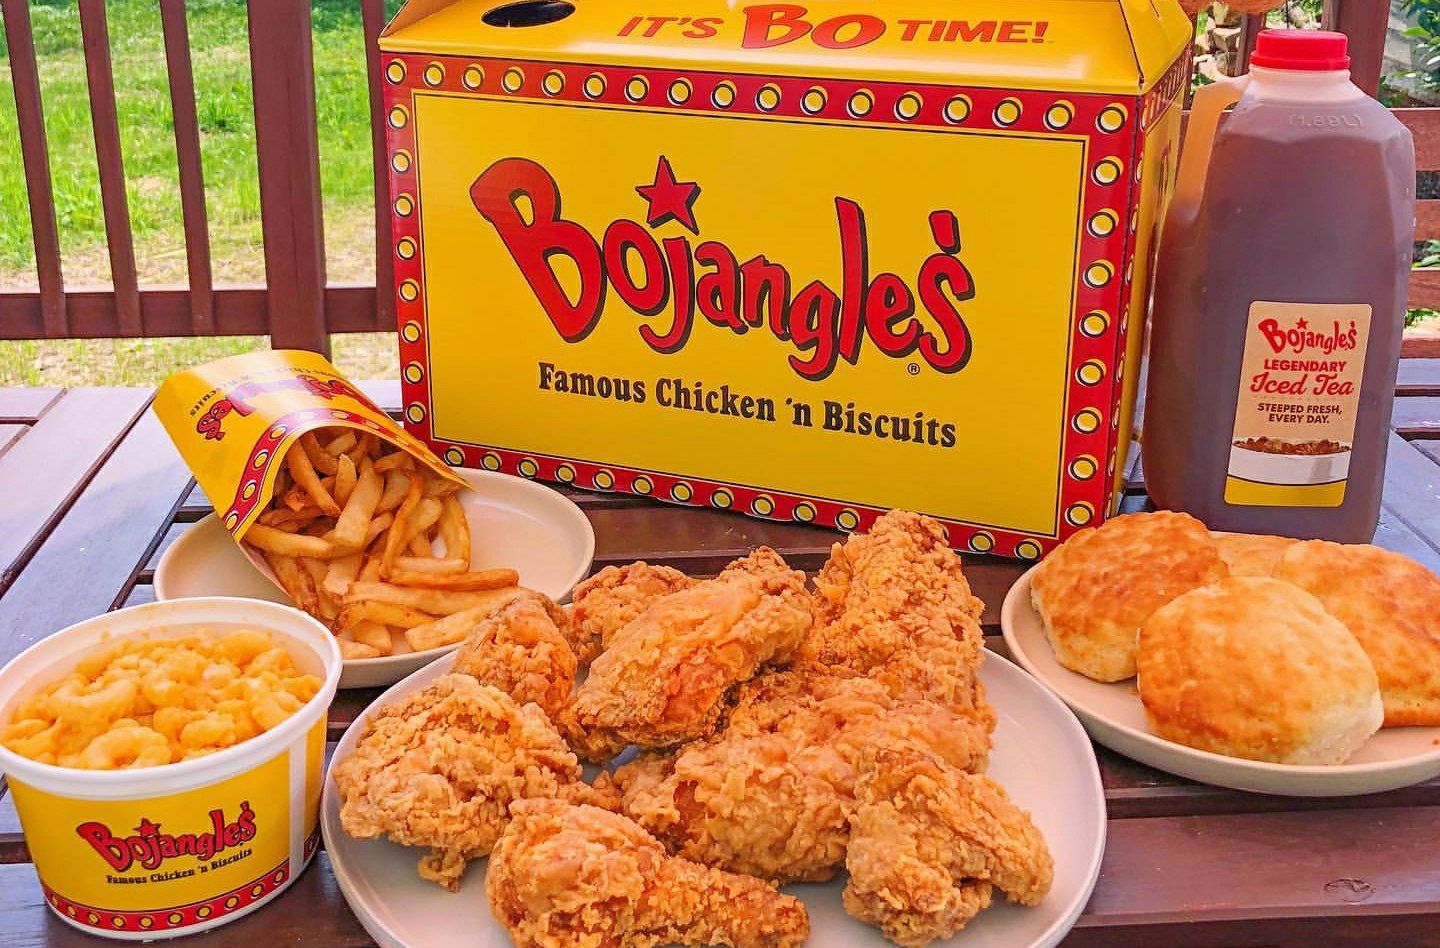 Order In-app and Get Free Delivery at Bojangles for a Limited Time